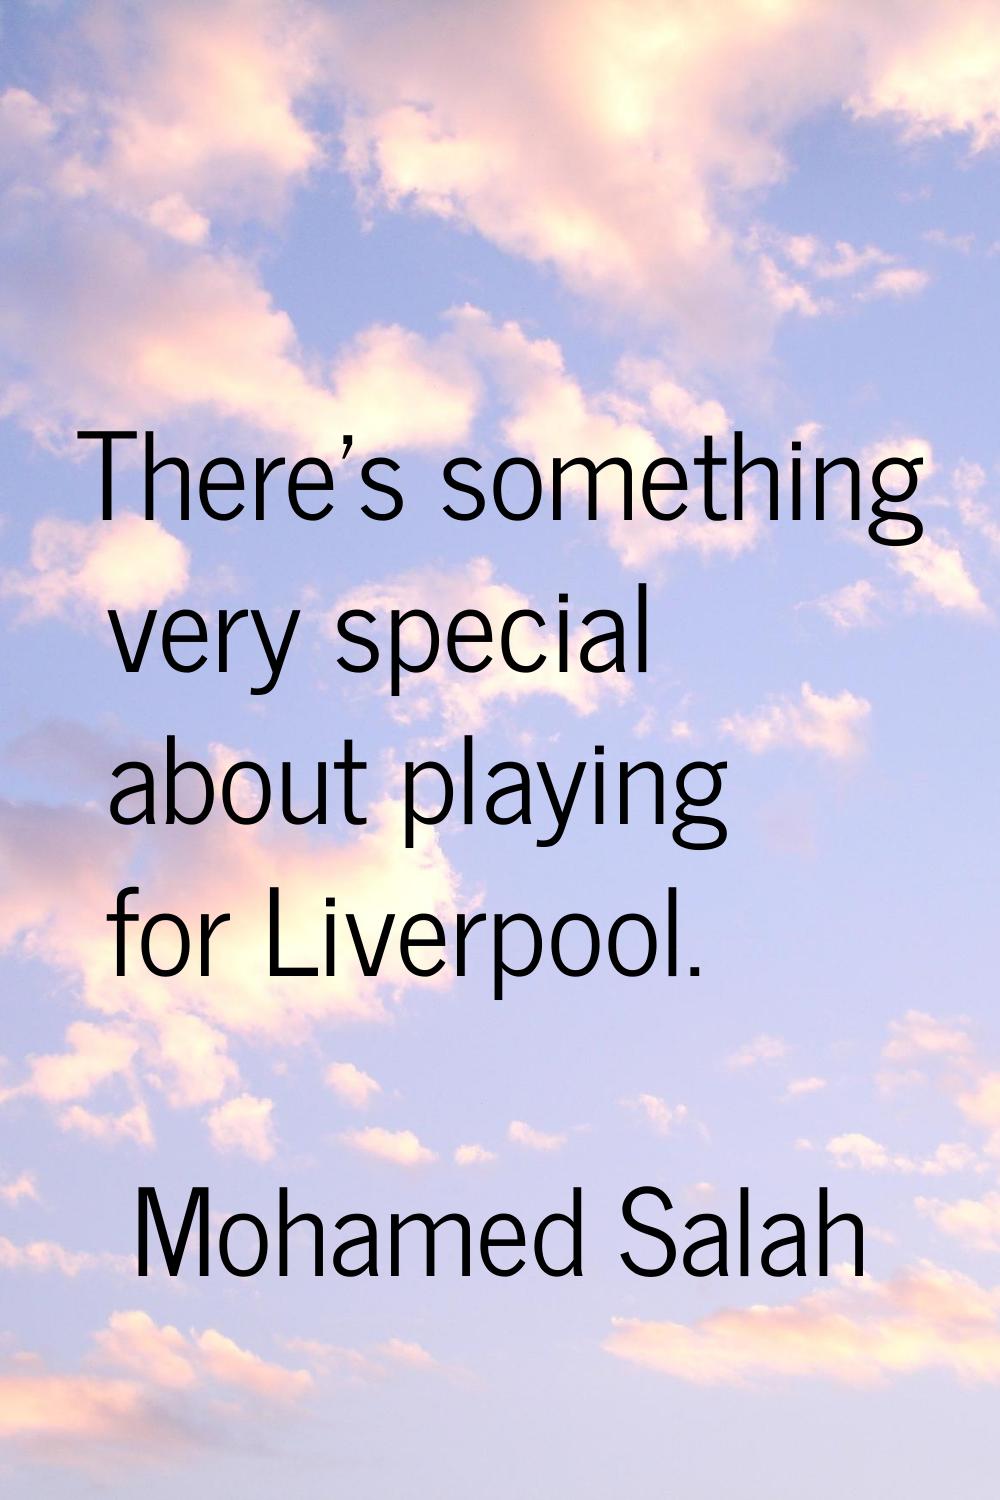 There's something very special about playing for Liverpool.